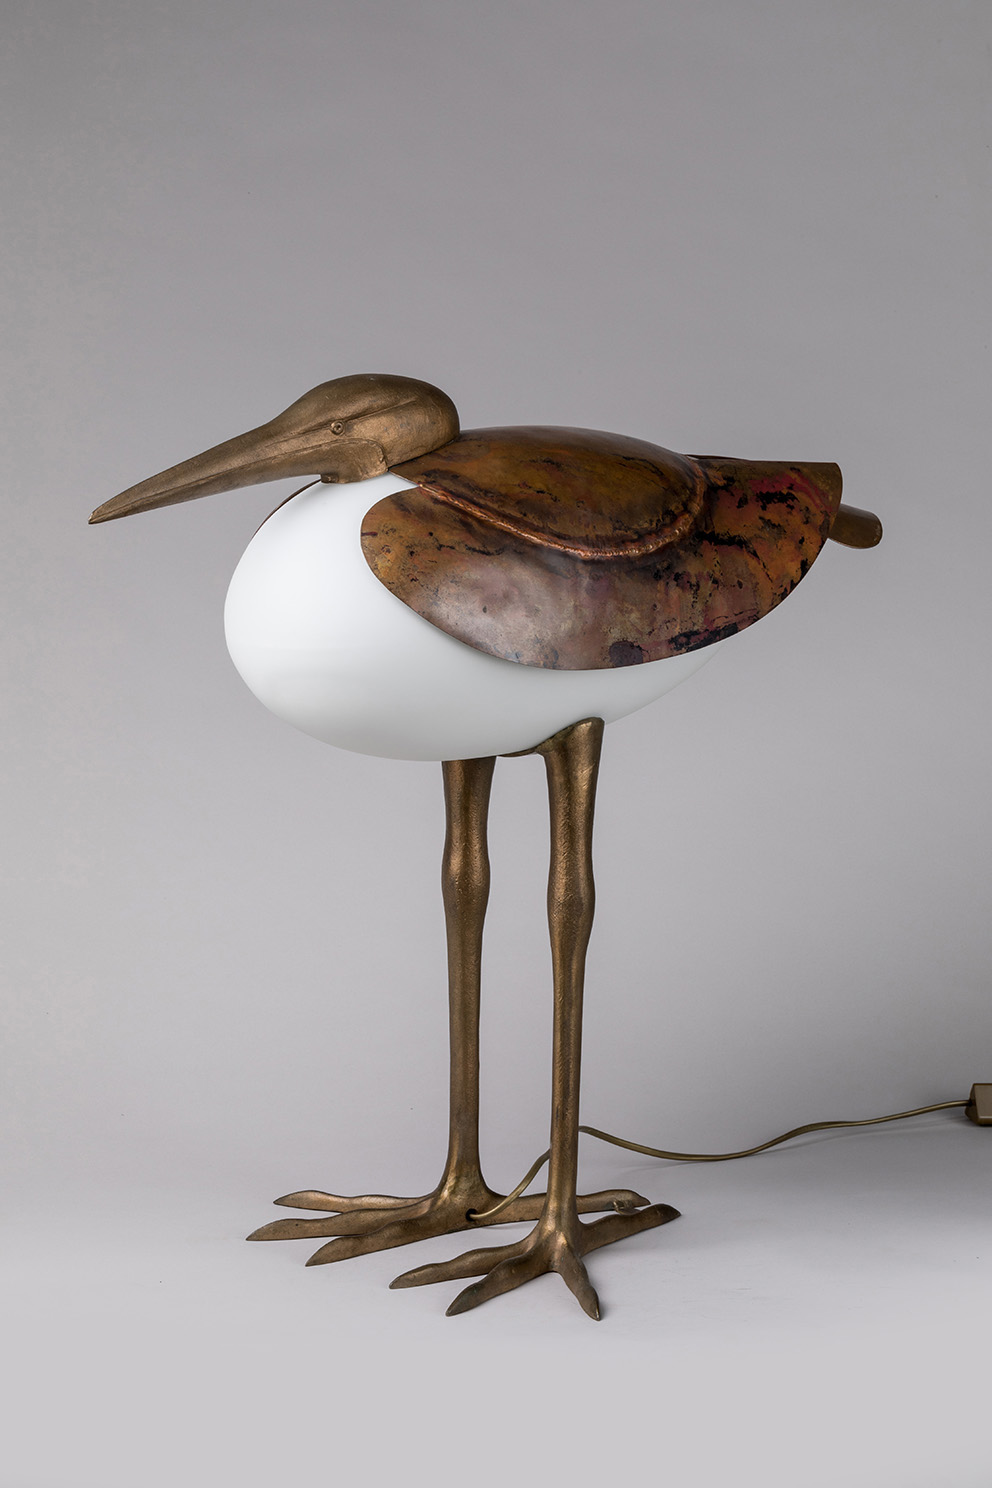 François-Xavier Lalanne: A Wading Bird Becomes a Lamp